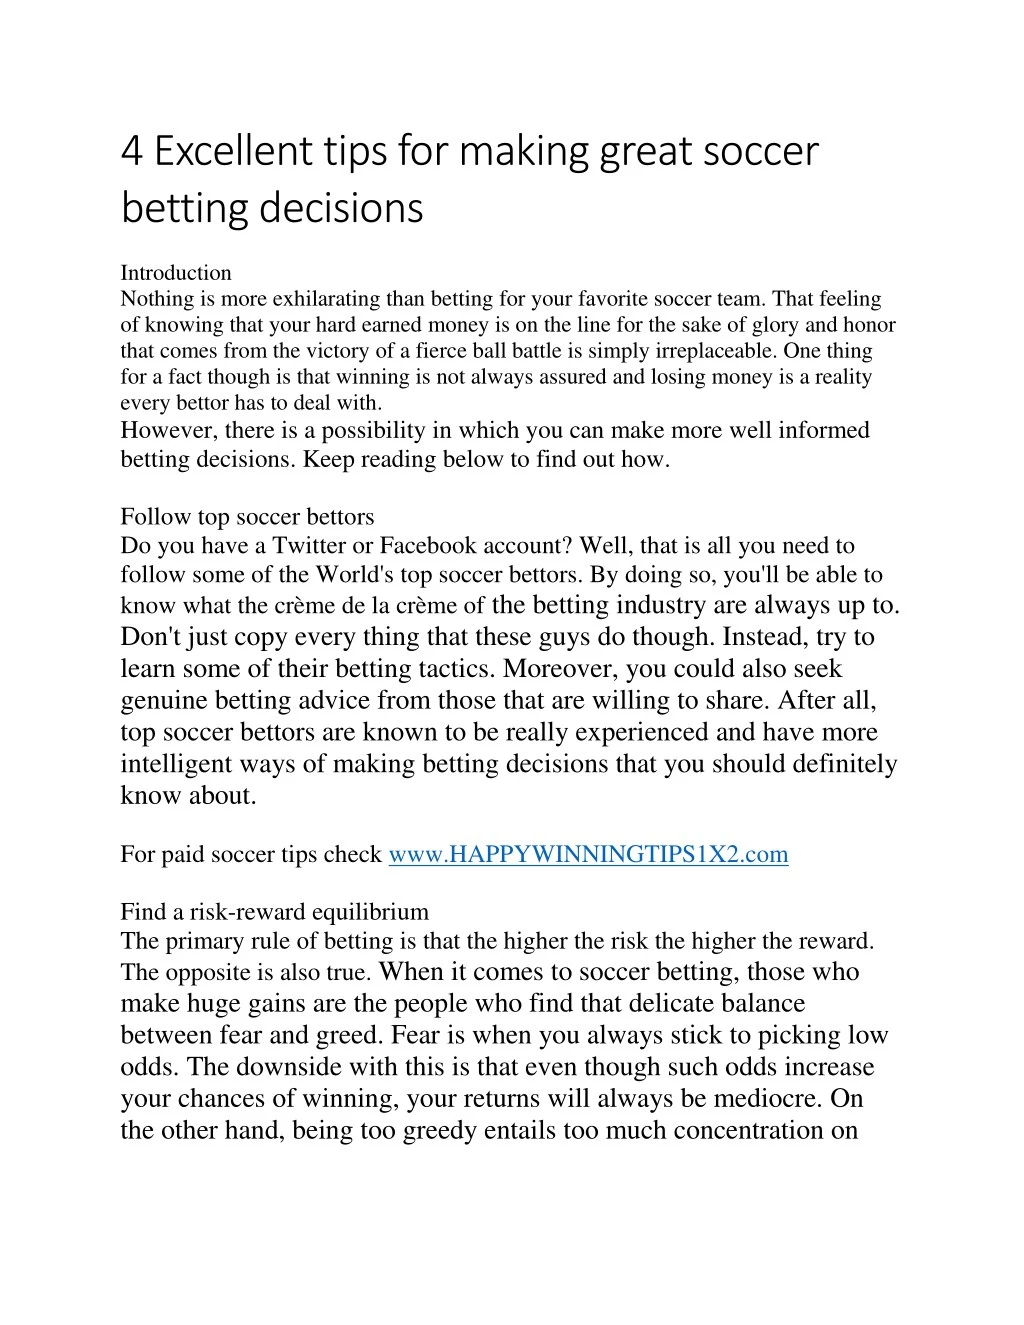 4 excellent tips for making great soccer betting